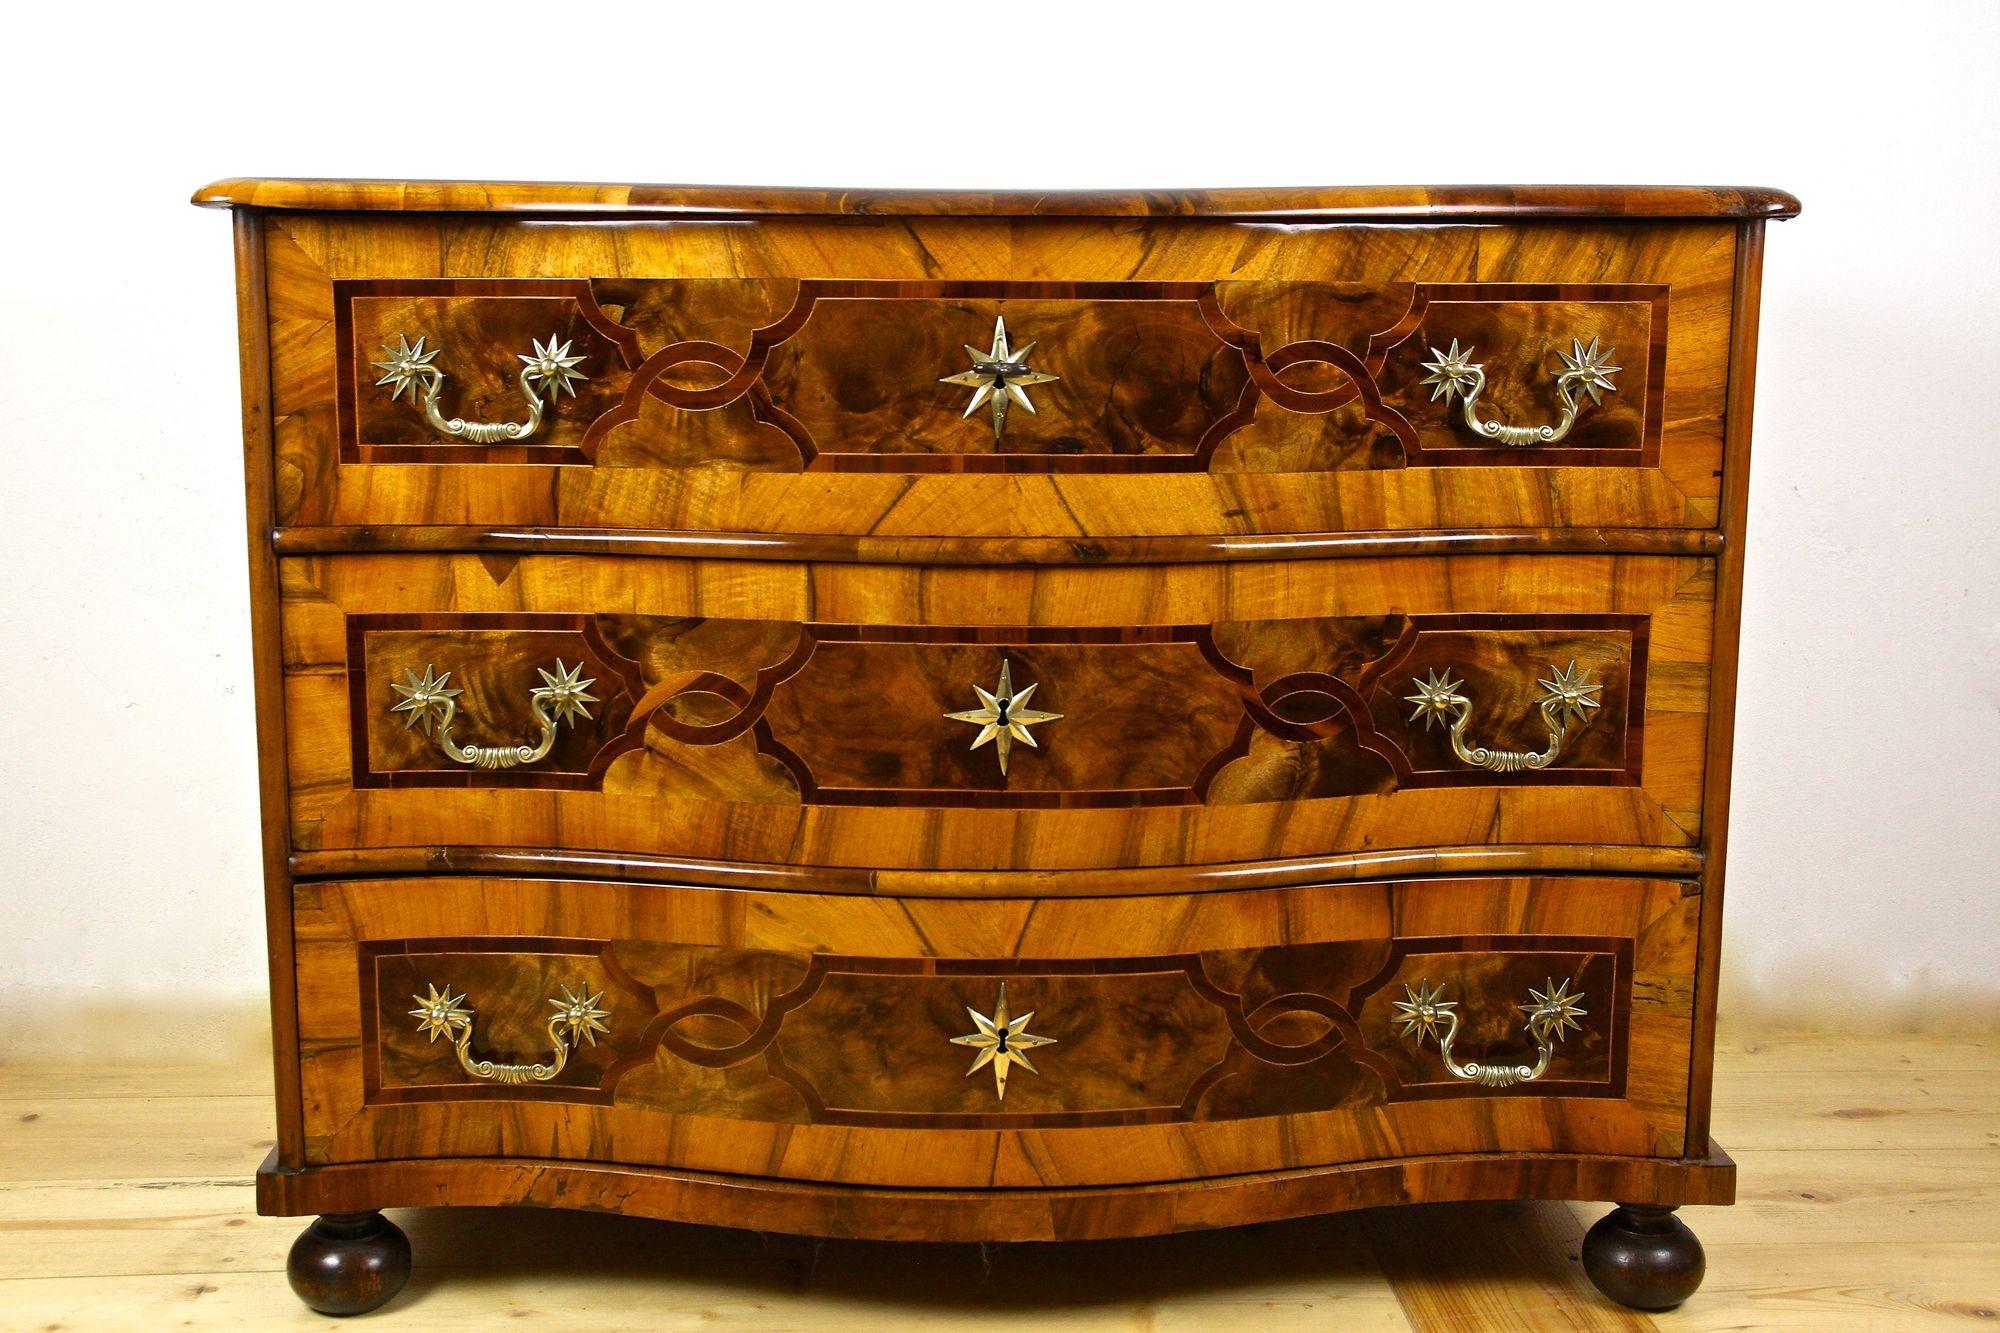 Exceptional baroque chest of drawers from the 18th century in Germany. Elaborately made in the period around 1760, this remarkable baroque commode impresses with outstanding veneered nutwood surfaces and great designed marquetry works. All three